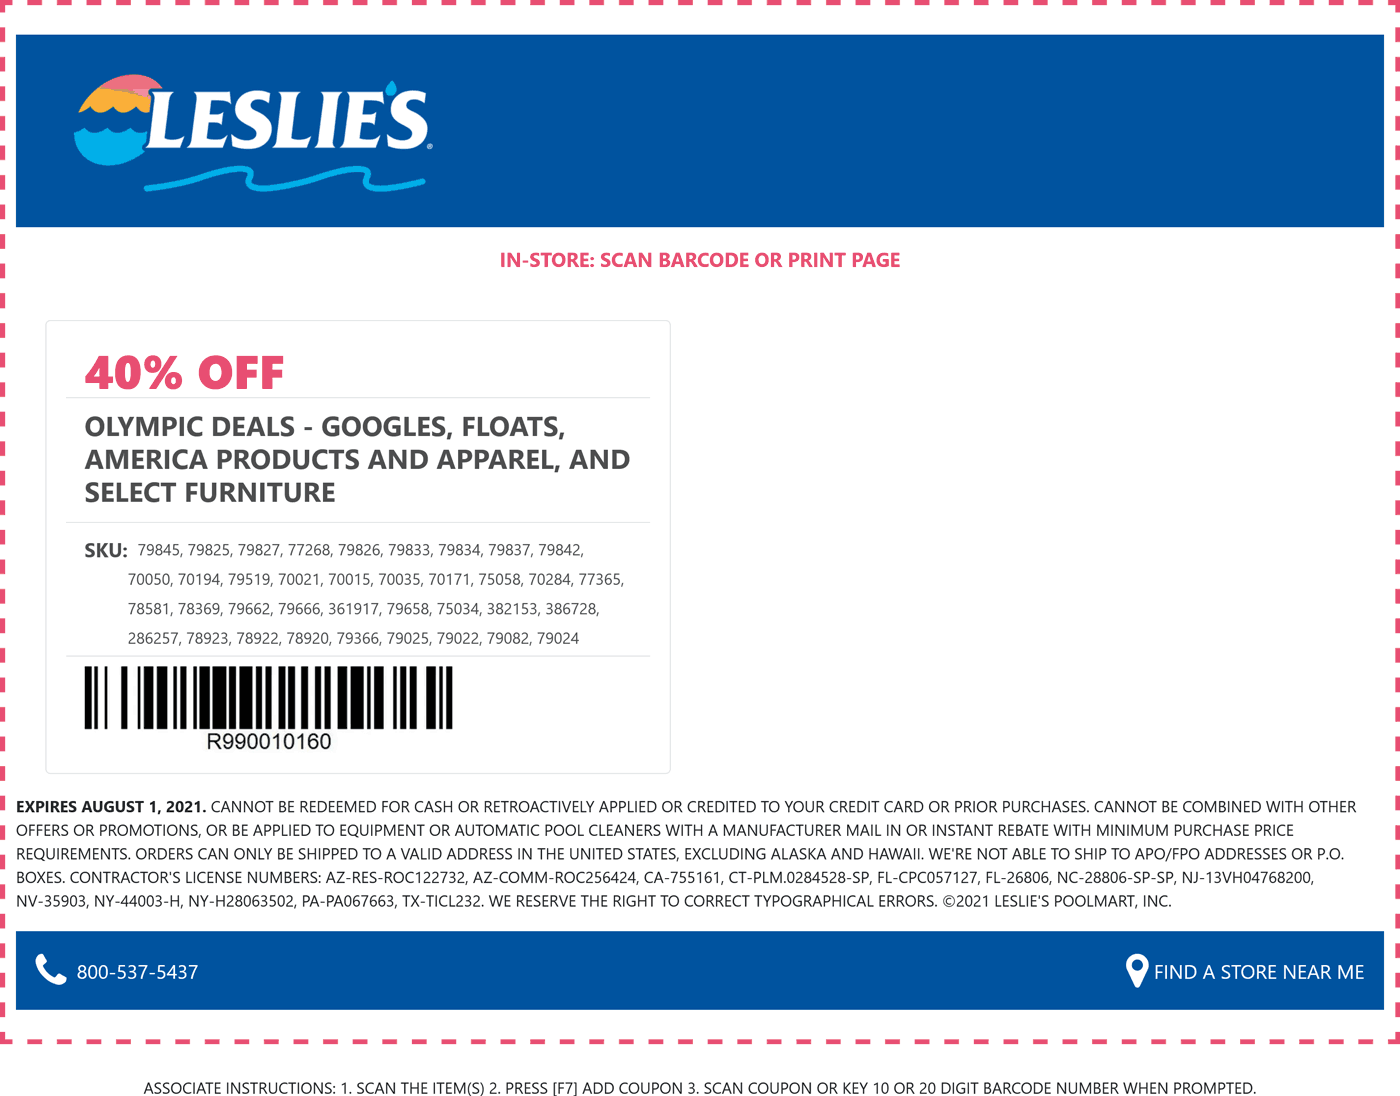 Leslies Pool Supplies stores Coupon  40% off goggles, floats, USA products & apparel at Leslies Pool Supplies #lesliespoolsupplies 